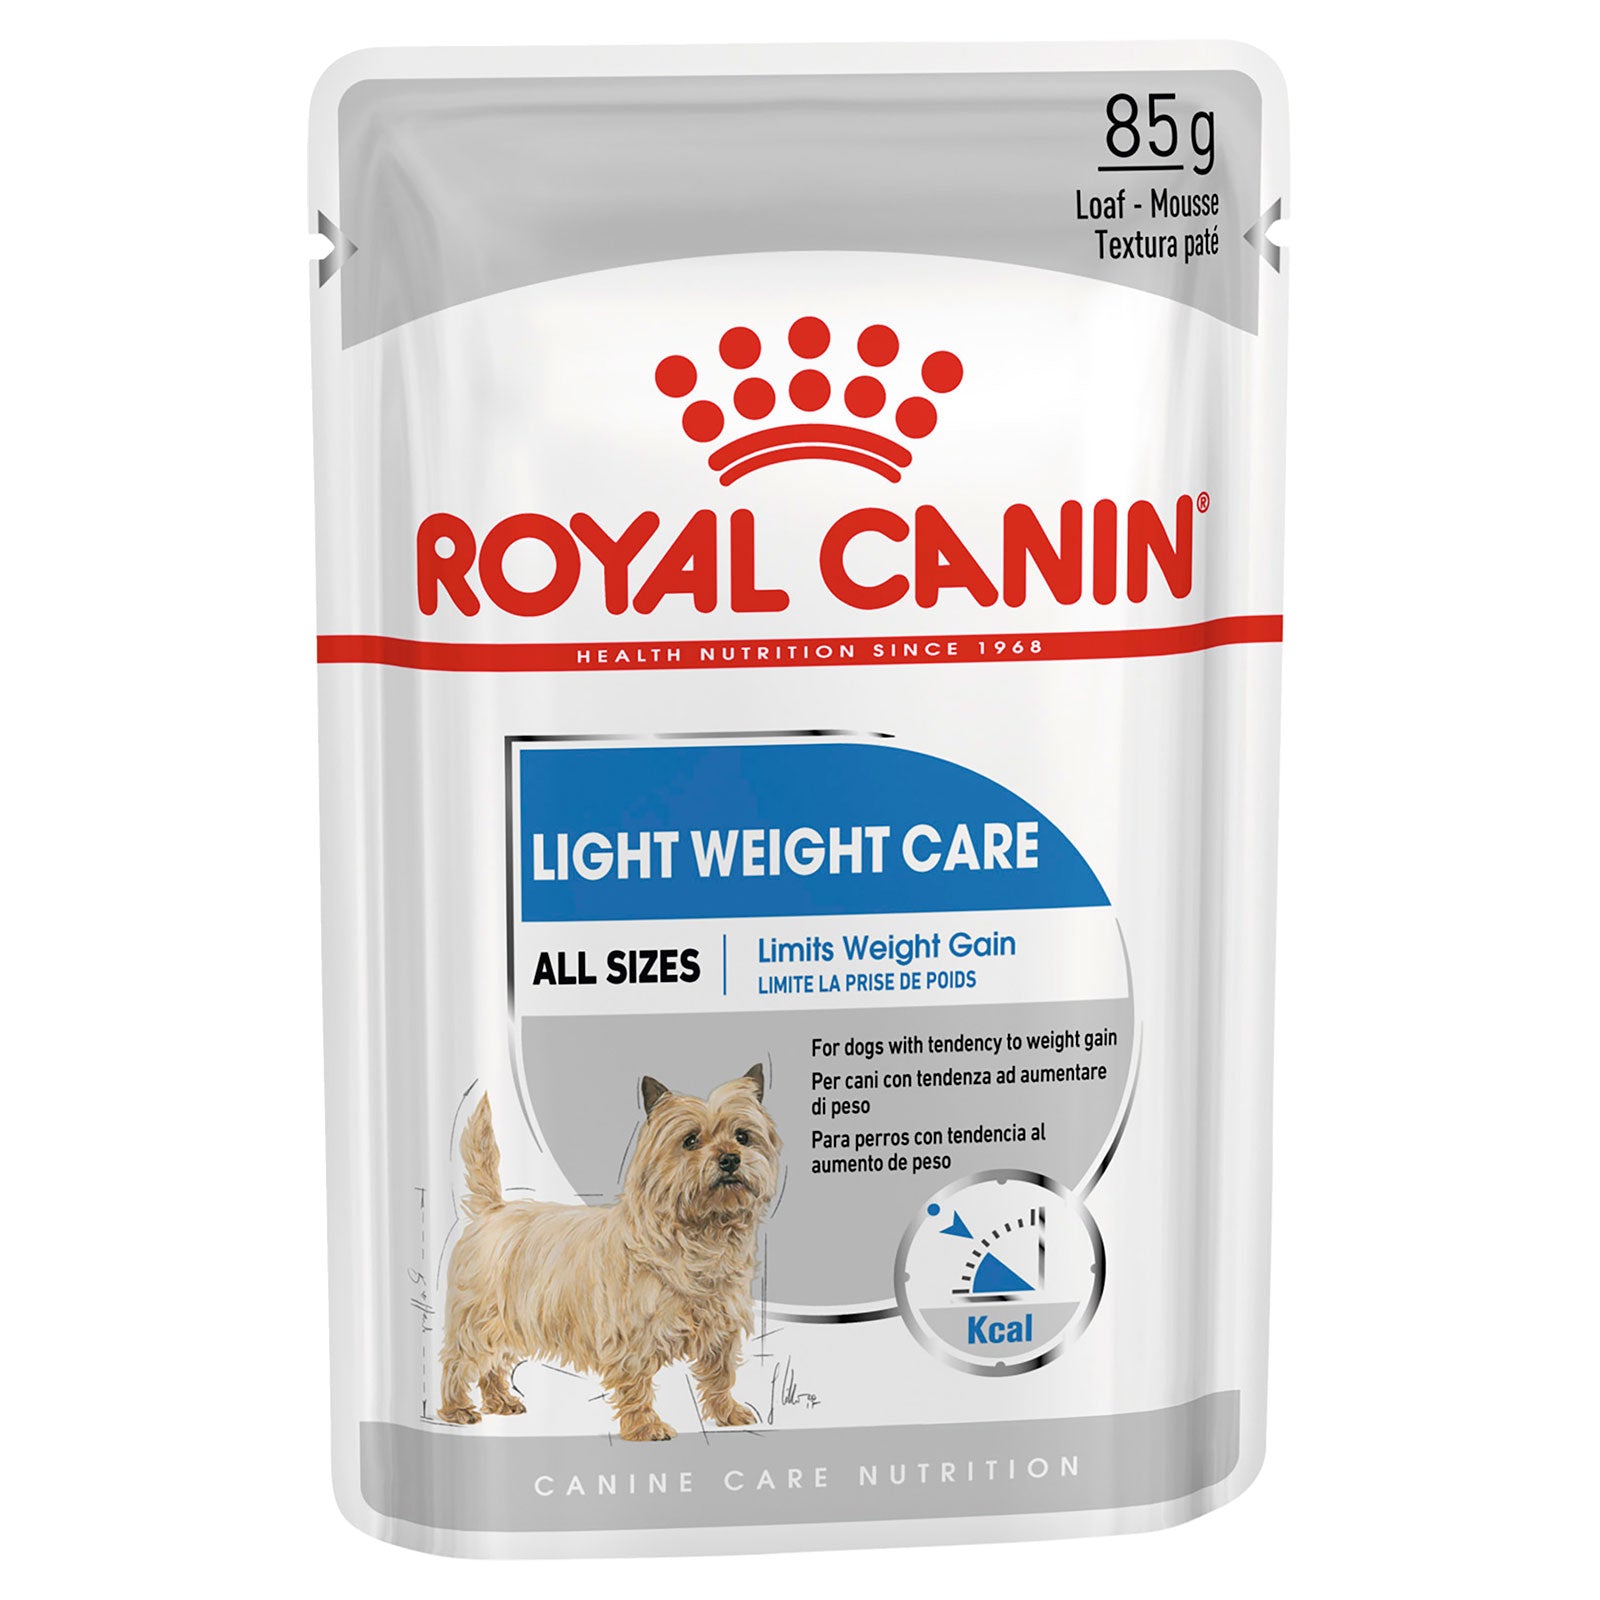 Royal Canin Dog Food Pouch Light Weight Care